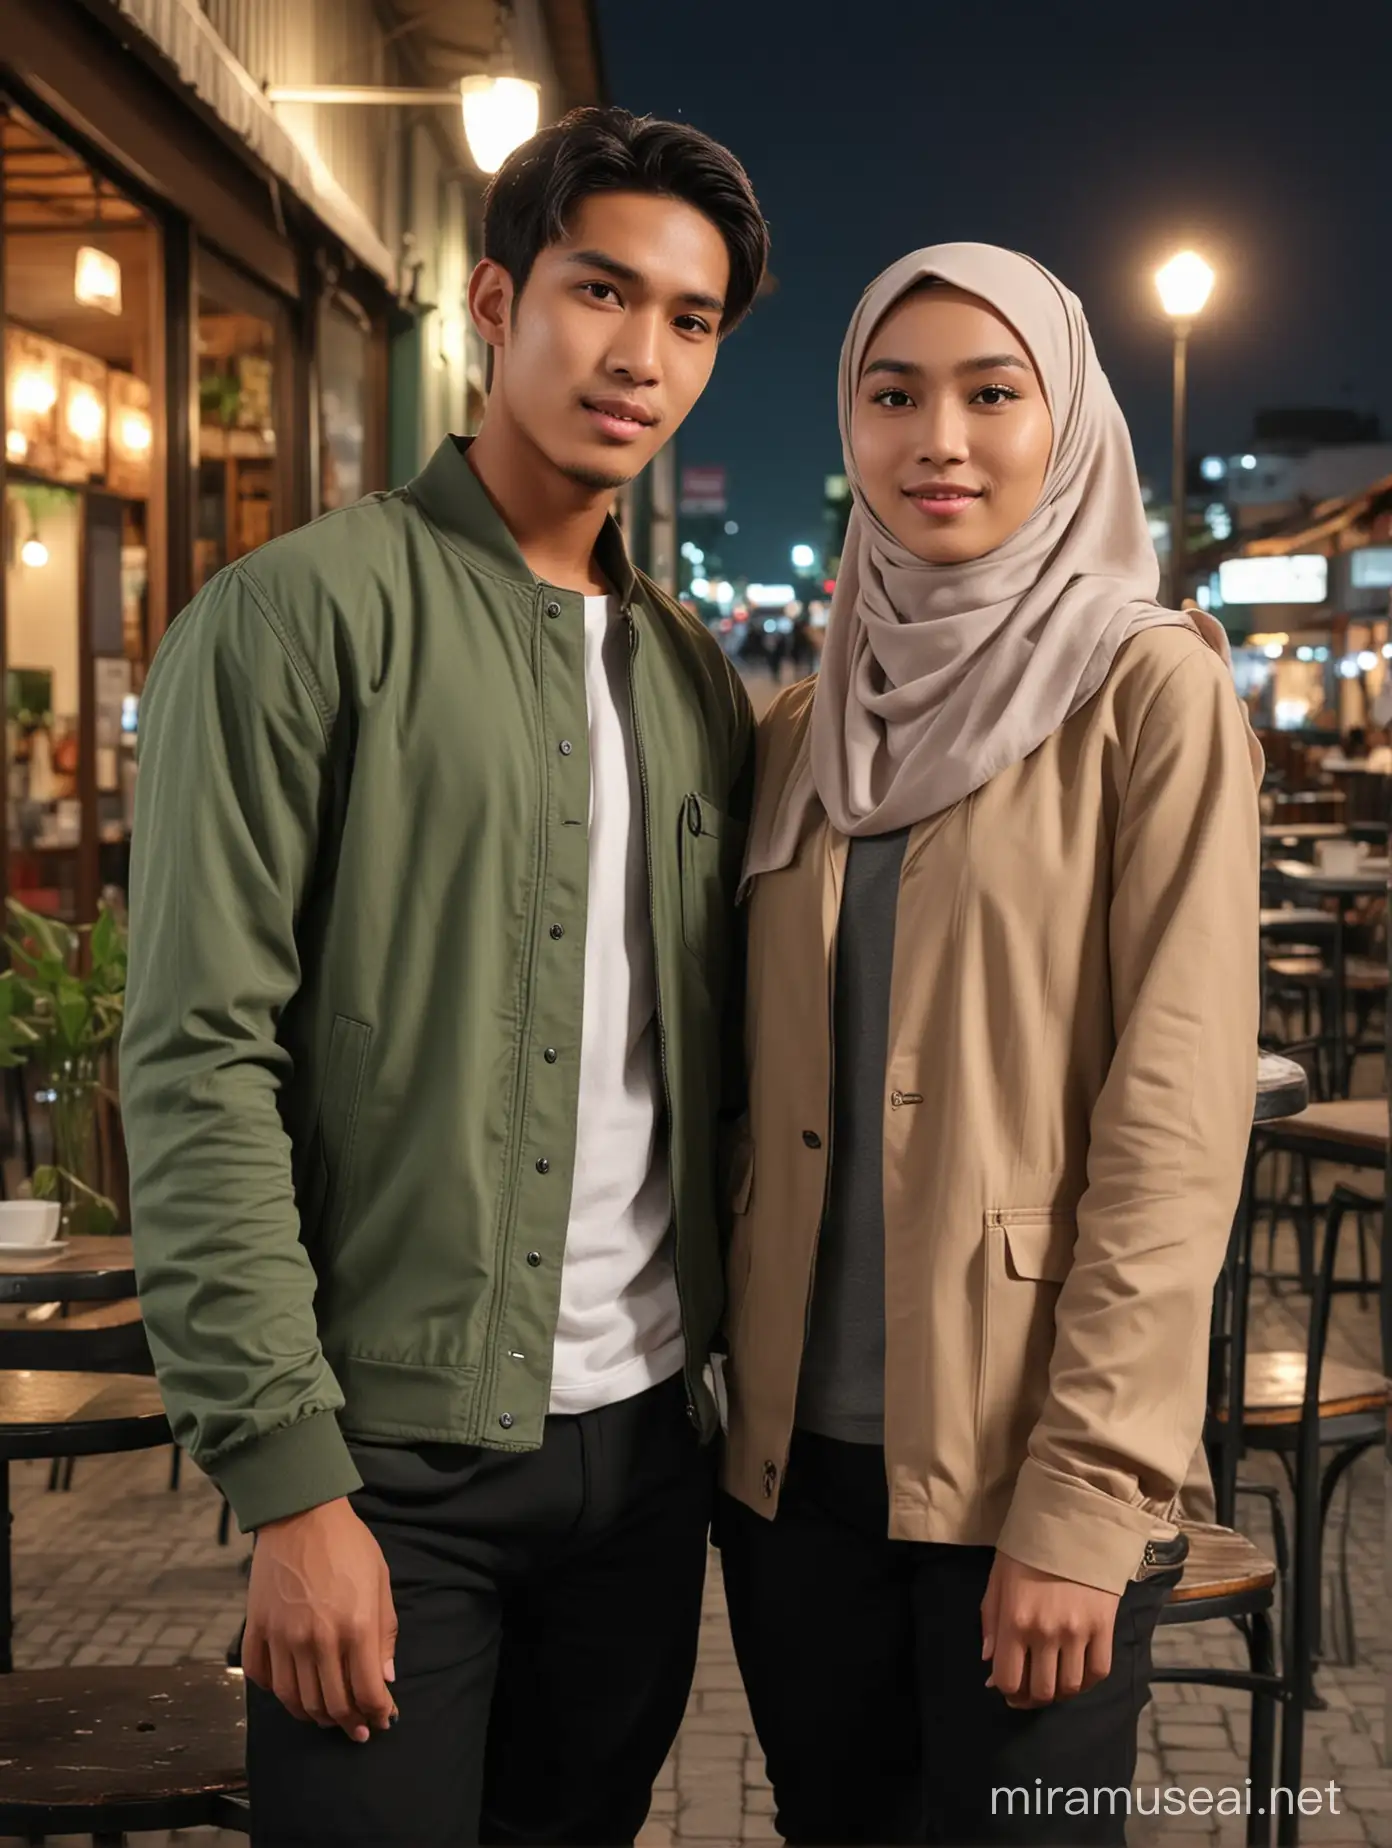 Indonesian Couple Portrait at Night Cafe